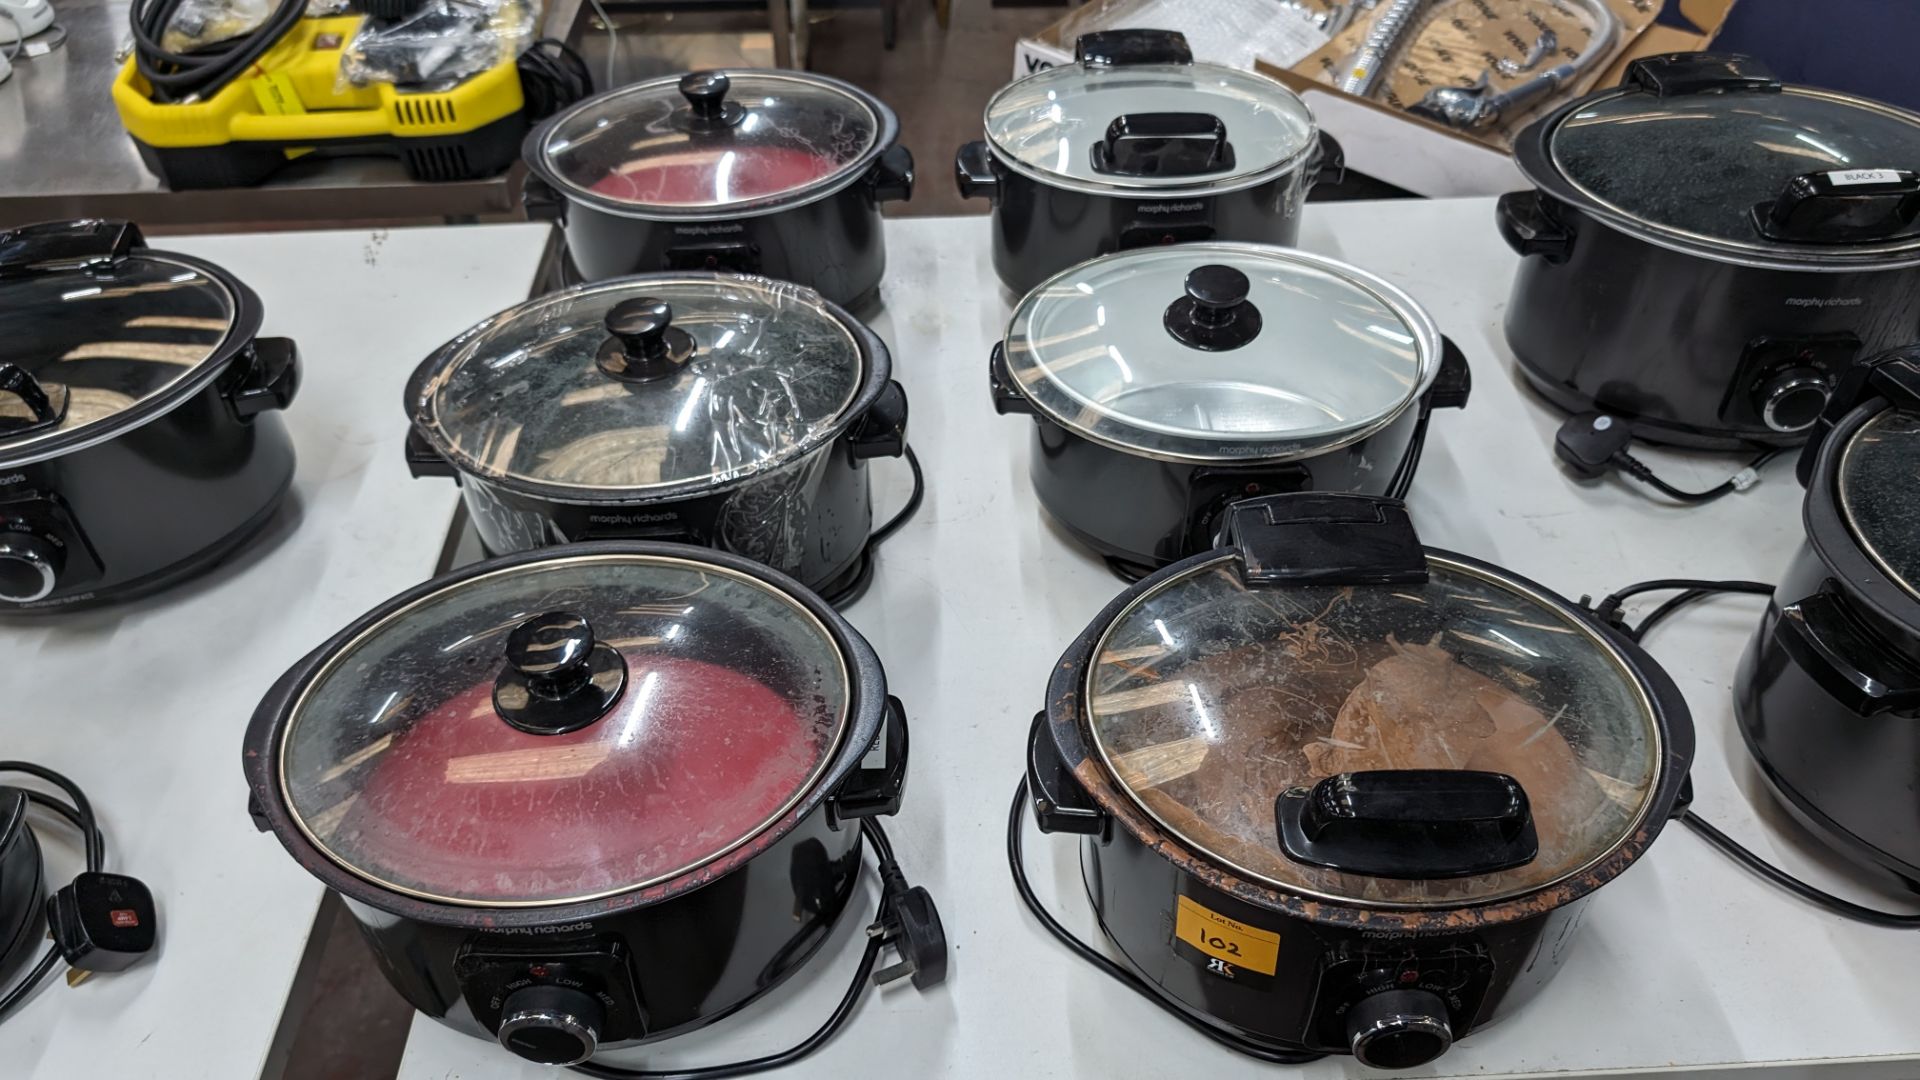 6 off Morphy Richards hinged lid slow cookers, model 460020. NB: At least some of these have been u - Image 2 of 10